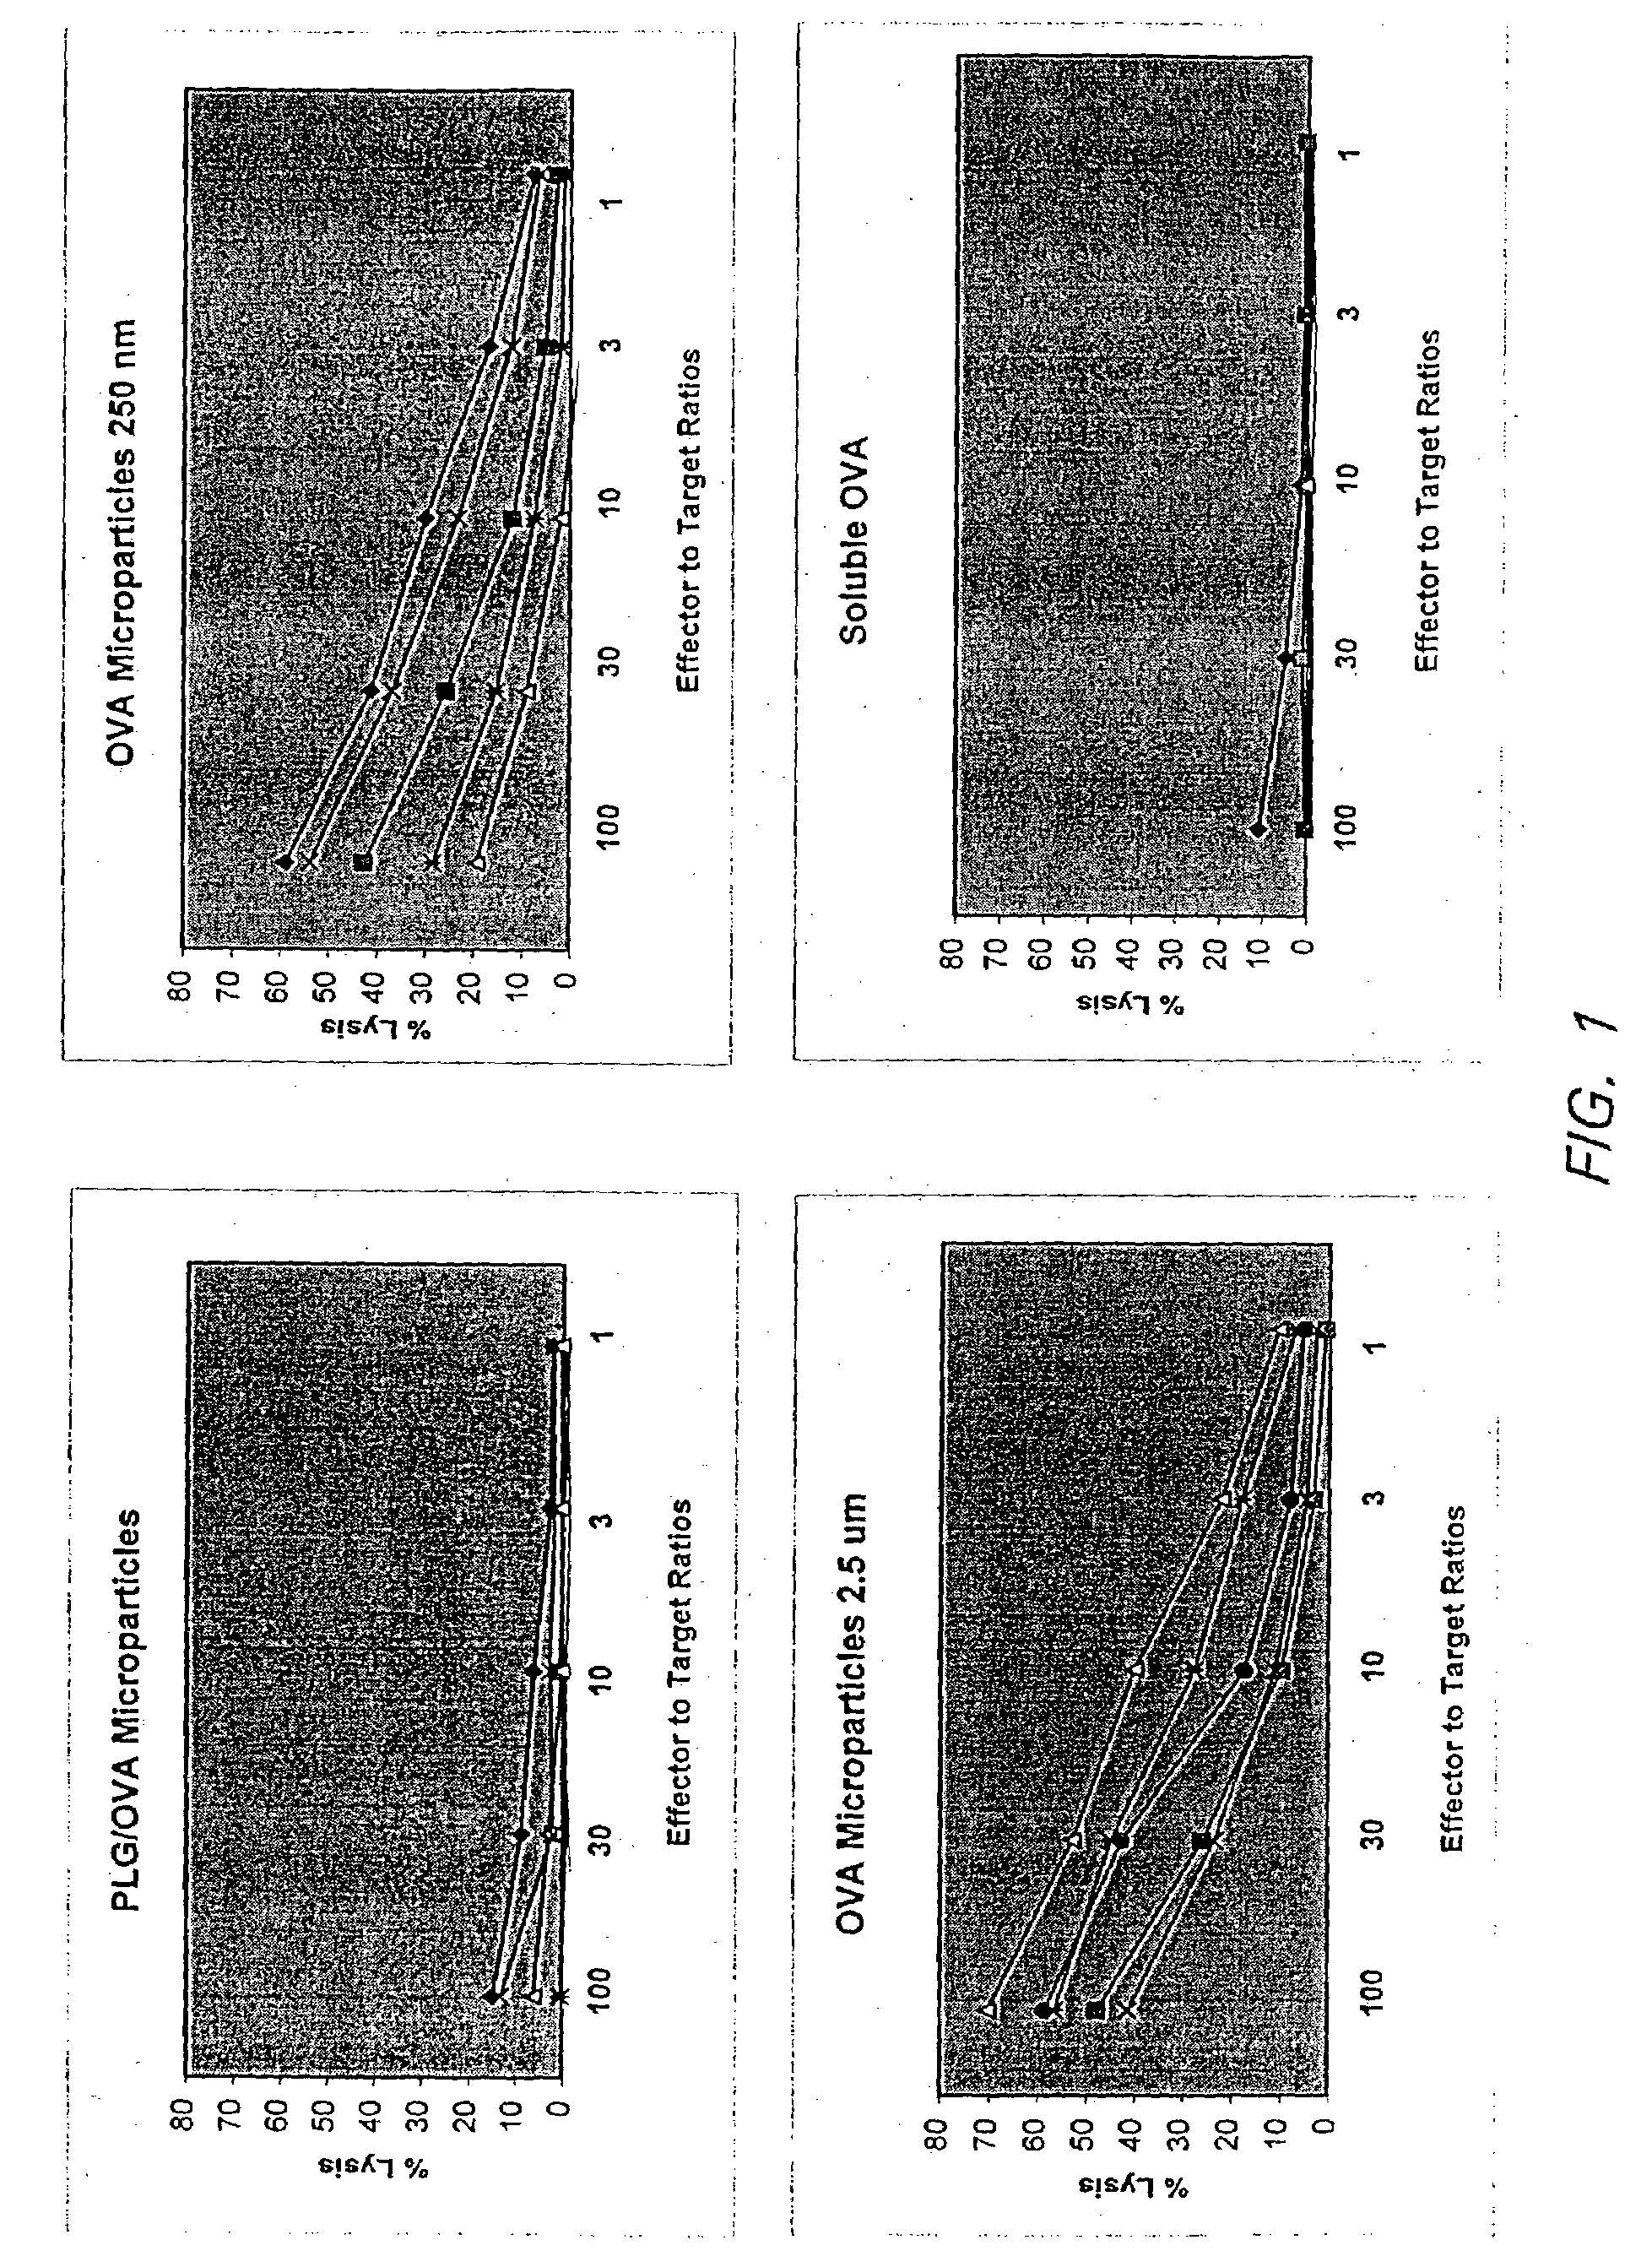 Method of obtaining cellular immune responses from proteins